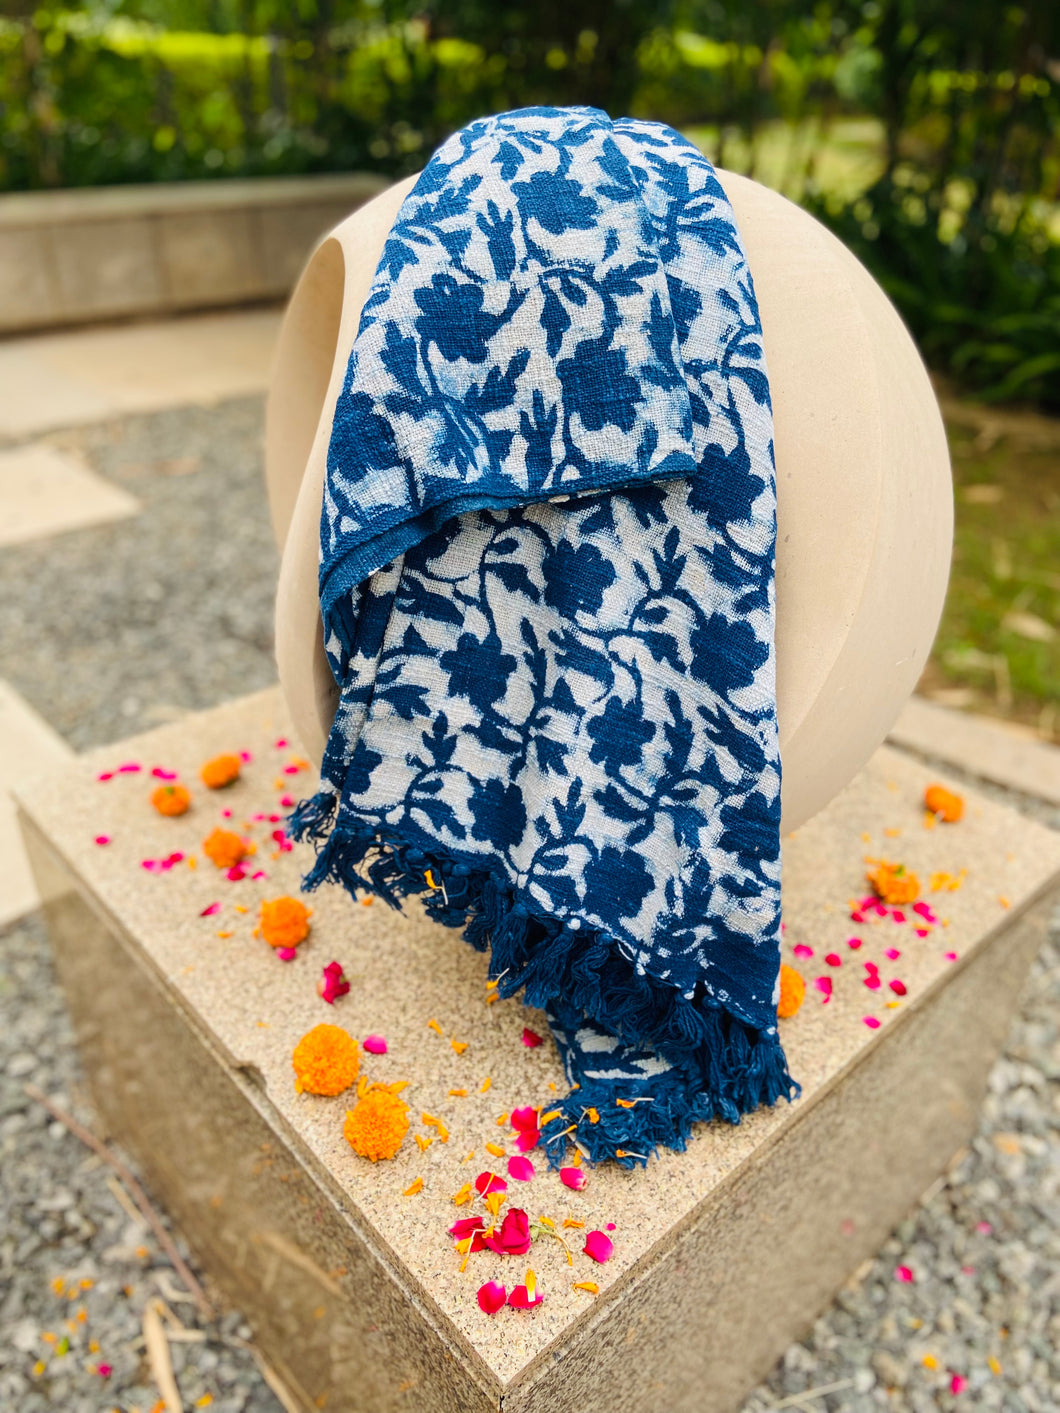 Floral Print - Indigo & Pigment Collection of Throws